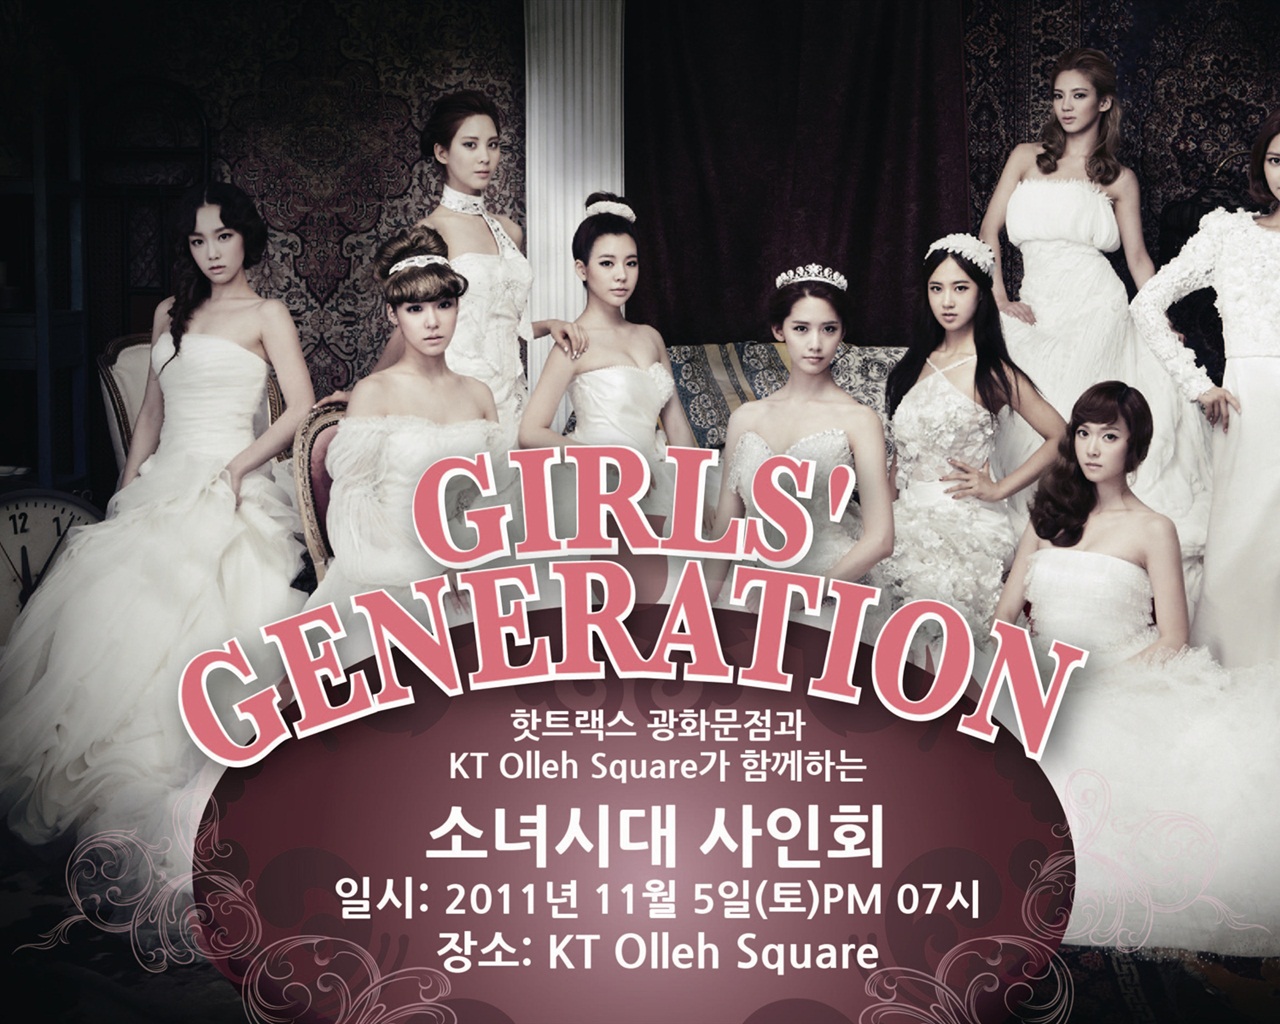 Girls Generation latest HD wallpapers collection #8 - 1280x1024